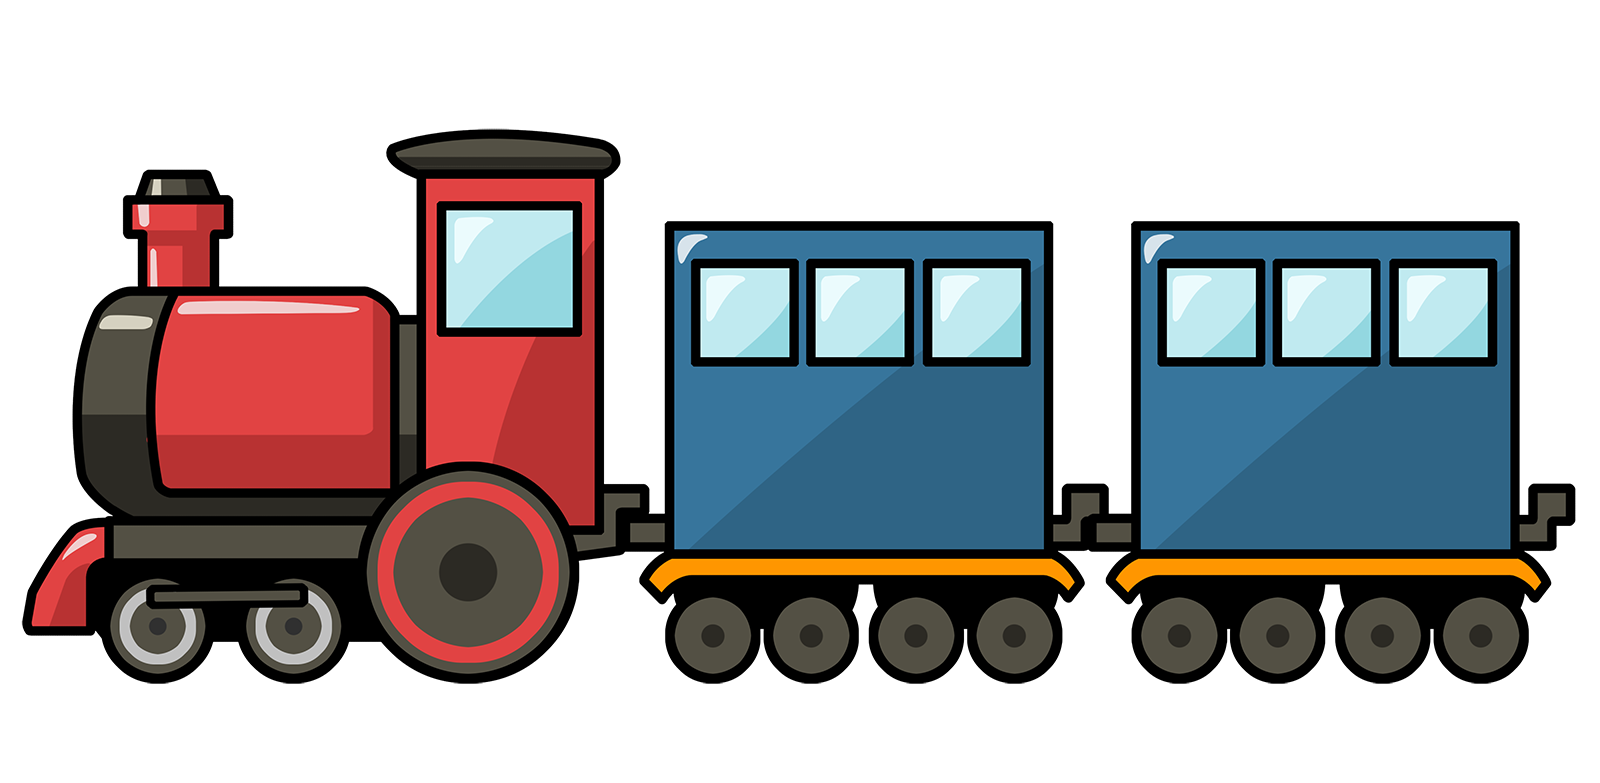 Train Engine Clipart Y4i99lkce Png